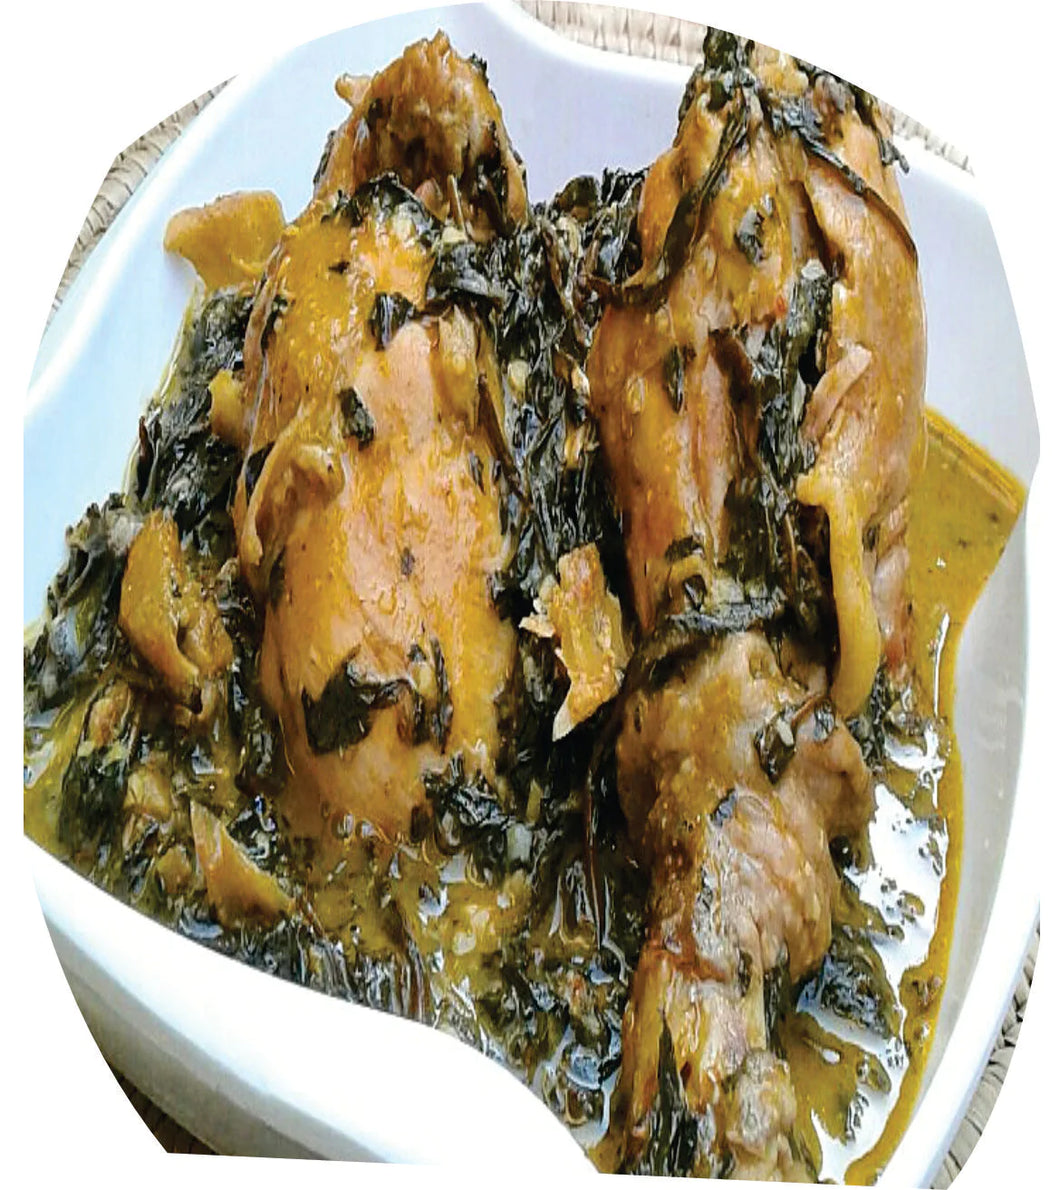 Afang soup with Goat Meat